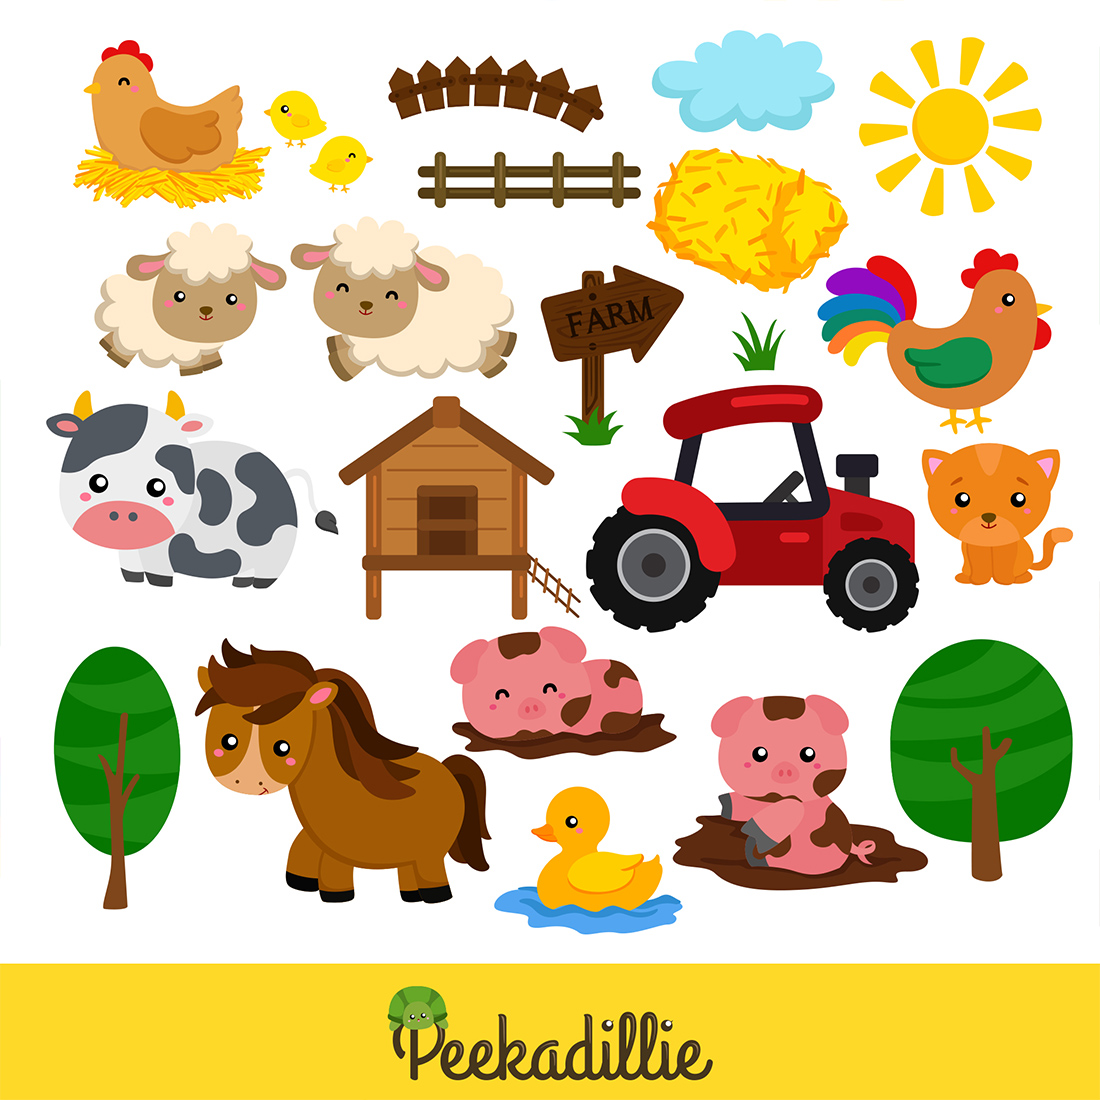 Cute and Fun At The Farm with Farmer Family and Animals Doing Harvest Vegetables with Tractor Barn Horse Sheep Cow Chicken Pig Duck Cartoon Illustration Vector Clipart Sticker Decoration Background Bundles Art preview image.